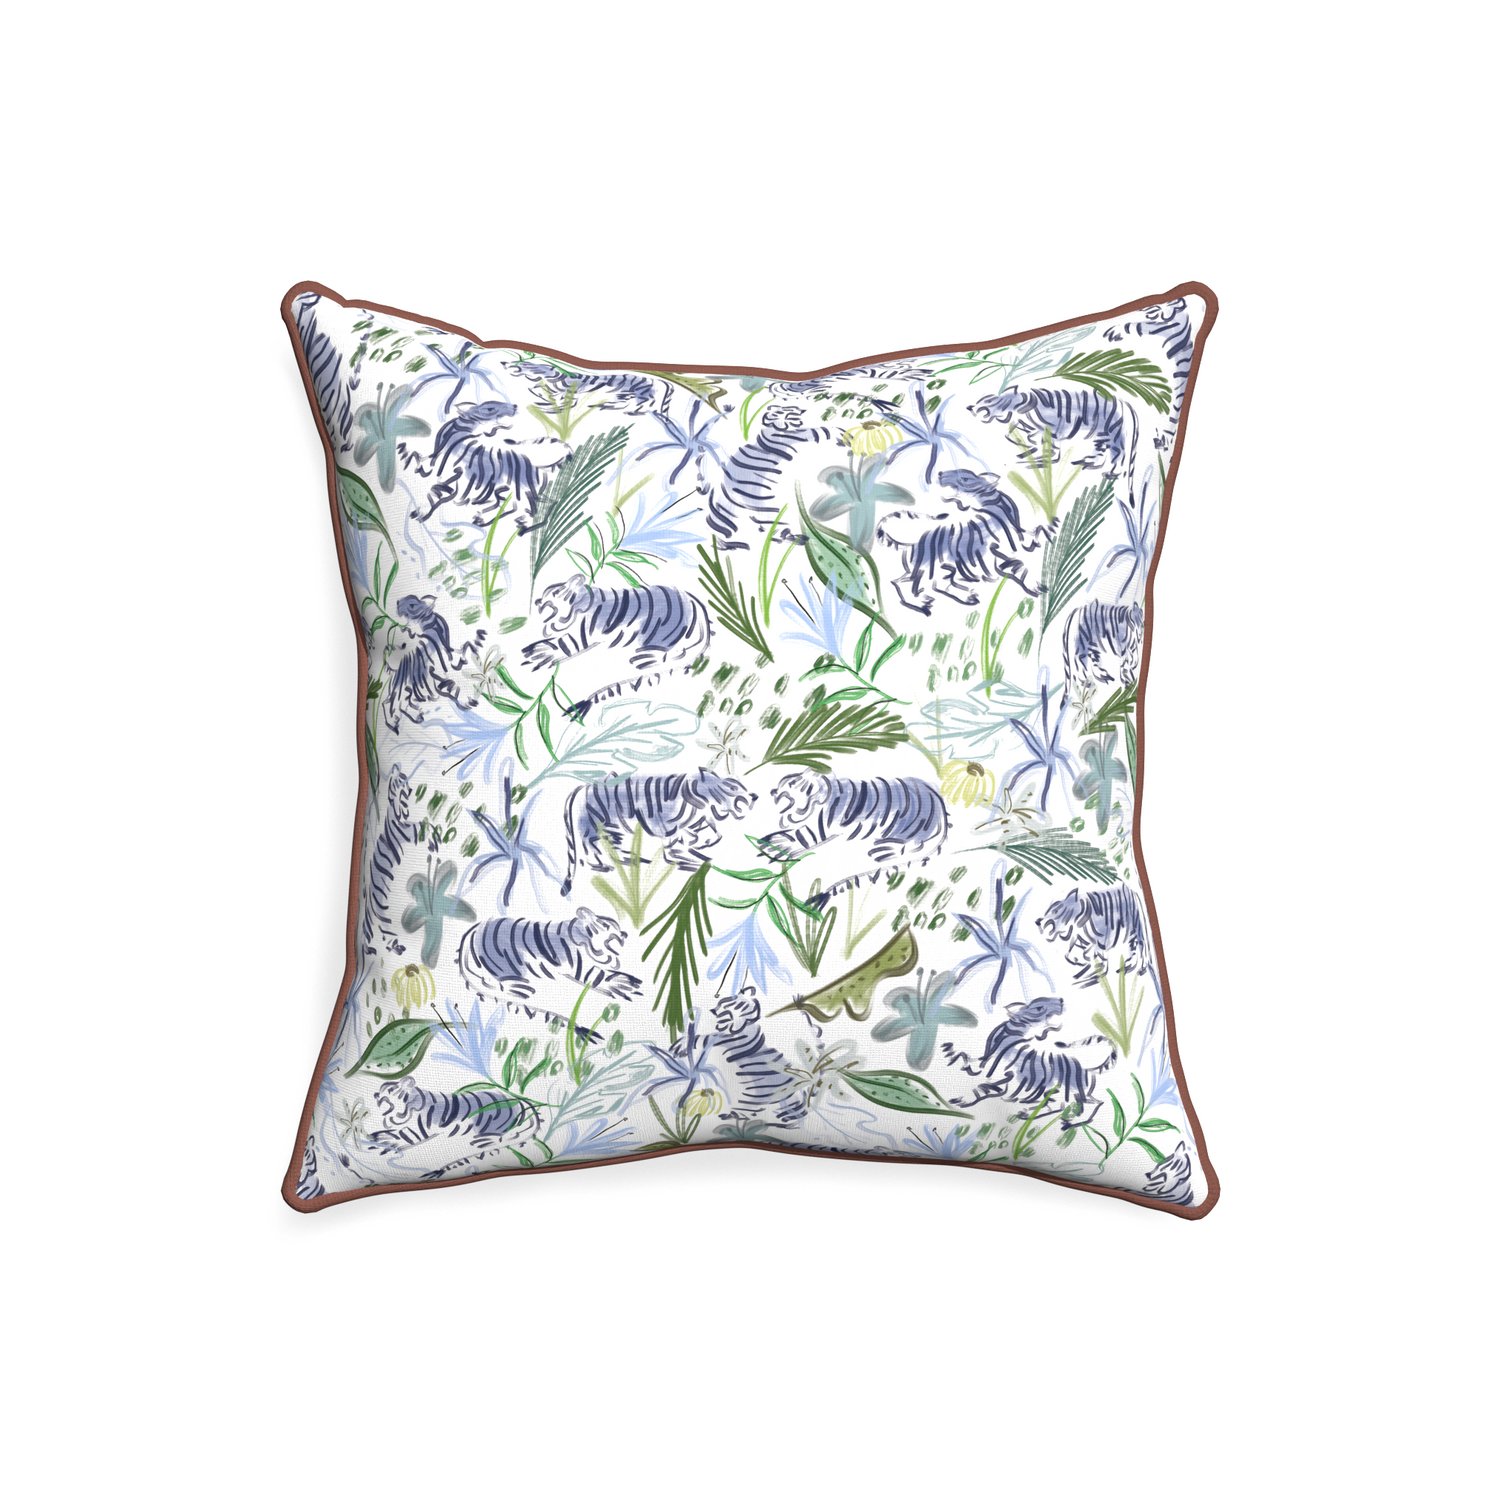 20-square frida green custom pillow with w piping on white background